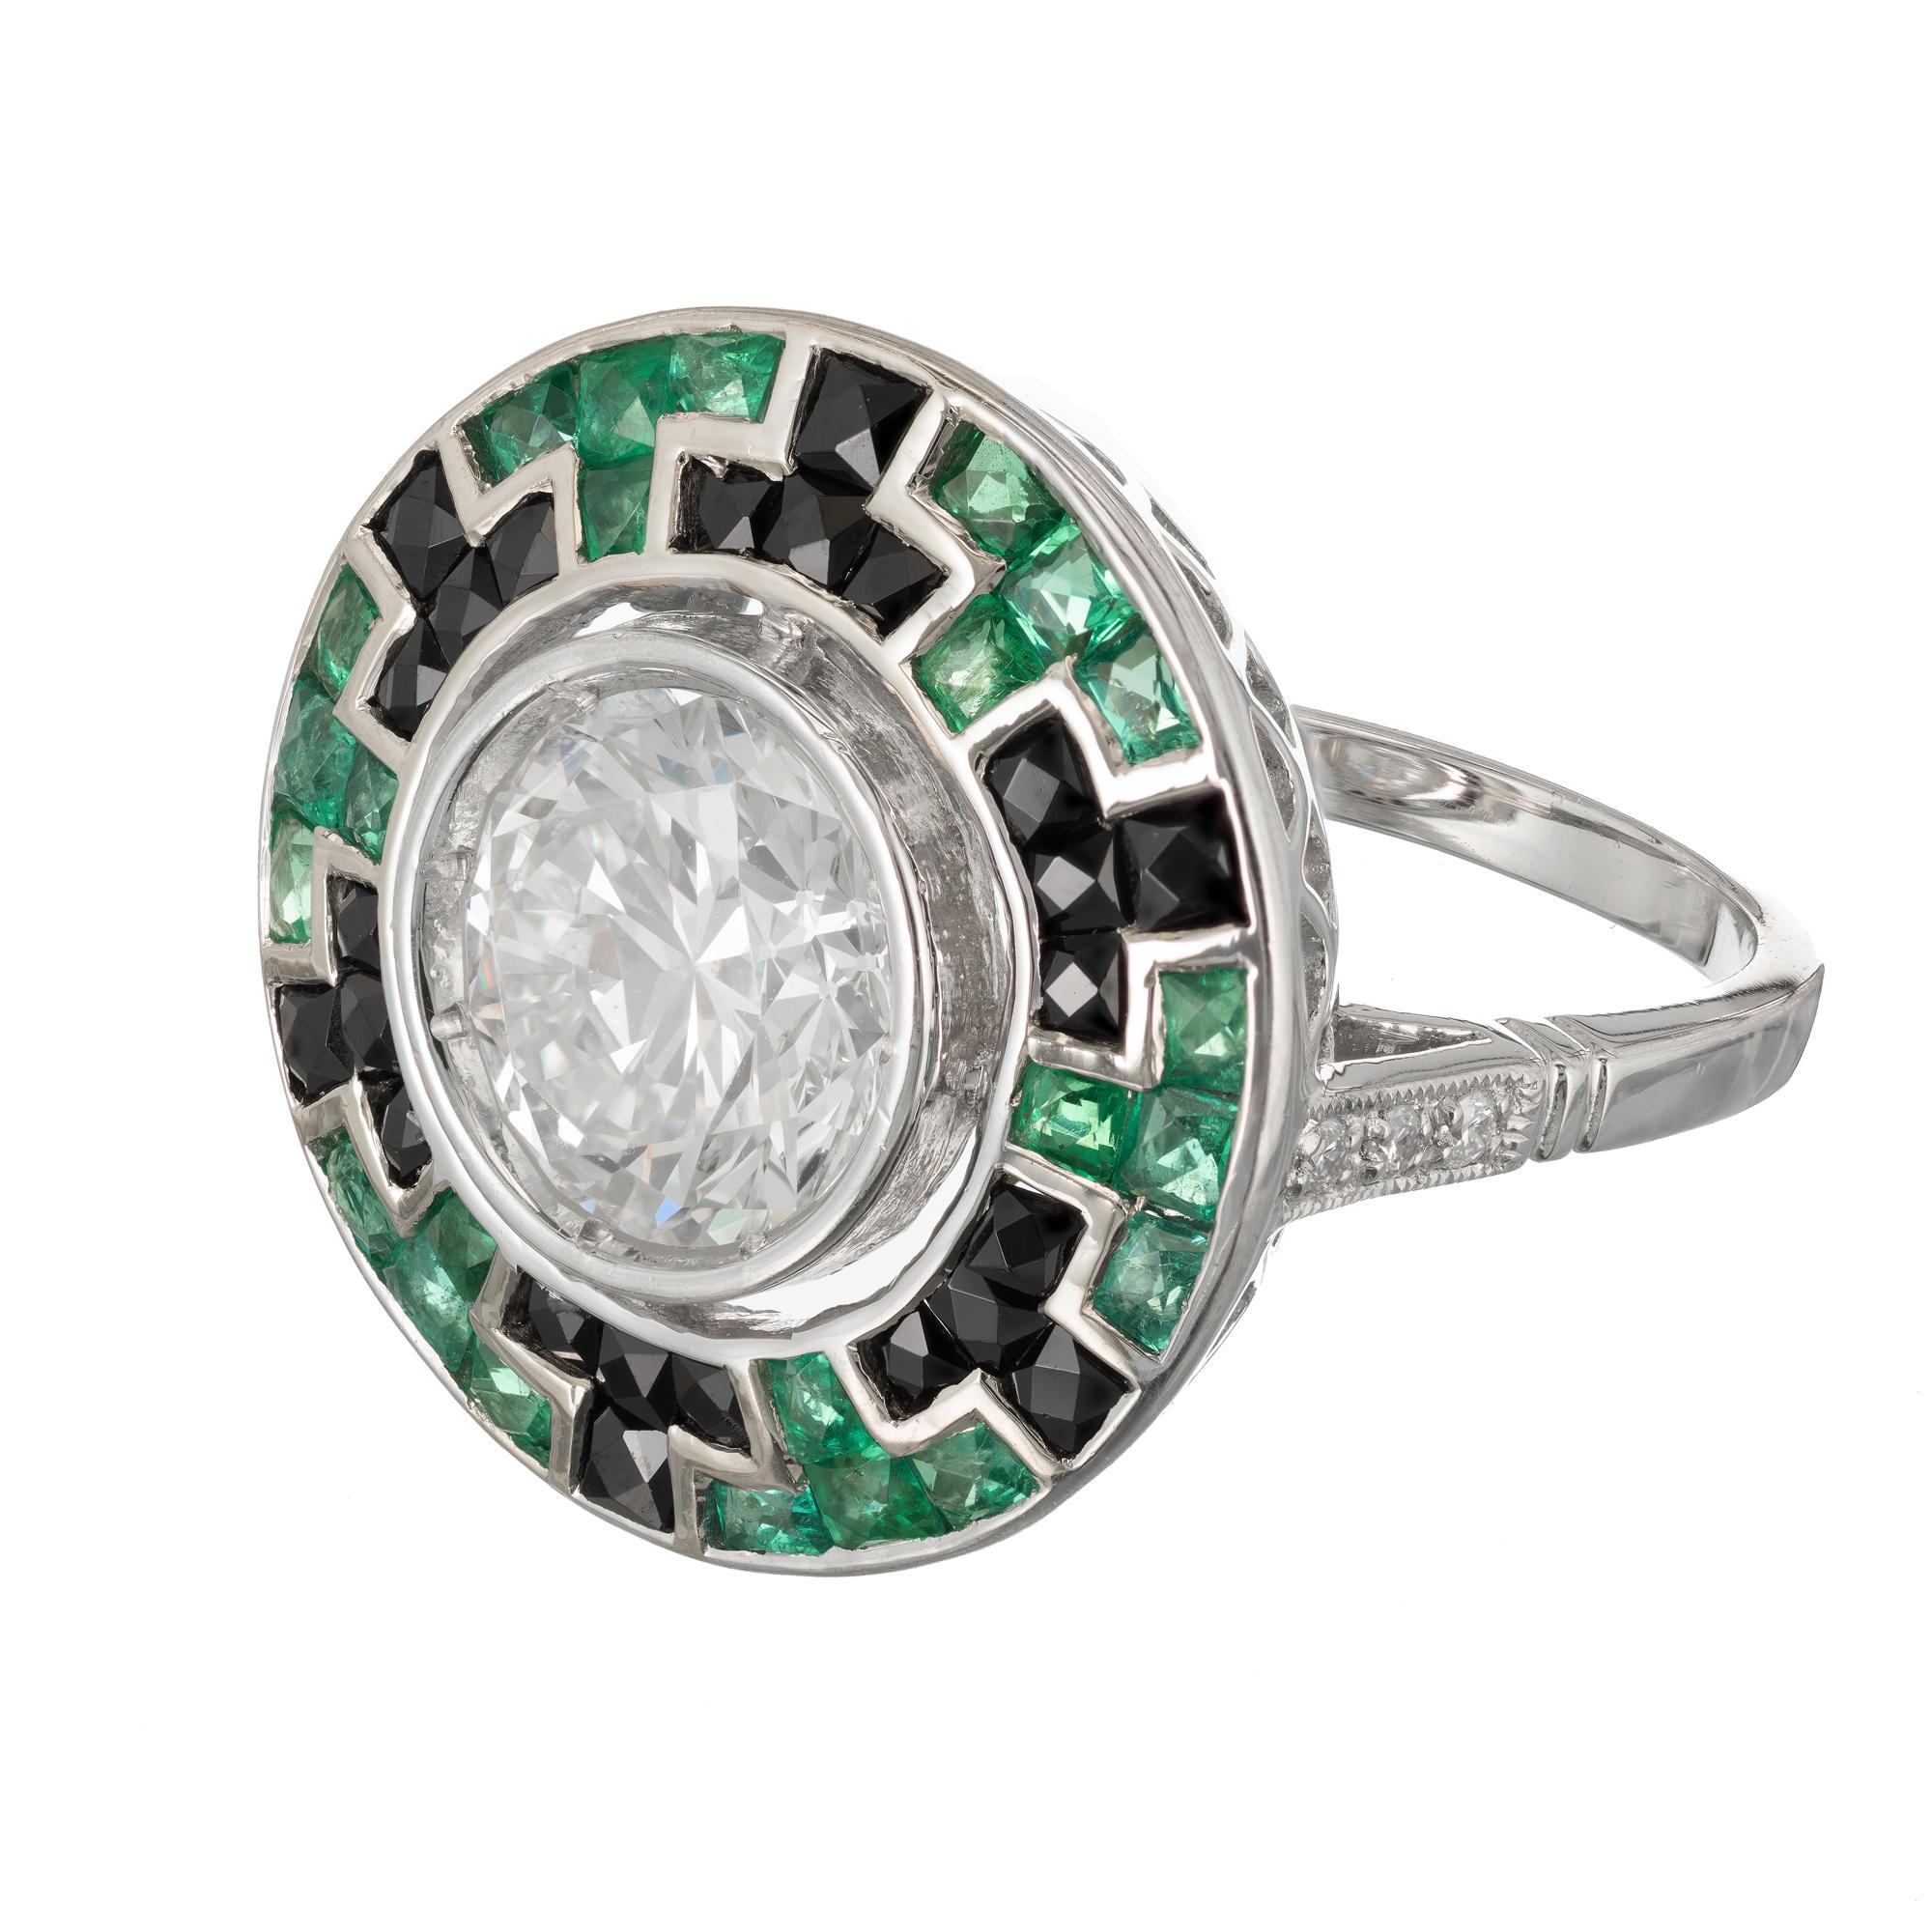 Diamond Emerald Onyx Mosaic Platinum Engagement Ring. GIA certified center Transitional brilliant cut diamond in a Calibré cut genuine emerald and black Onyx ring in a Platinum setting. 

1 round diamond, approx. total weight 2.52cts, K, VS2, 58%